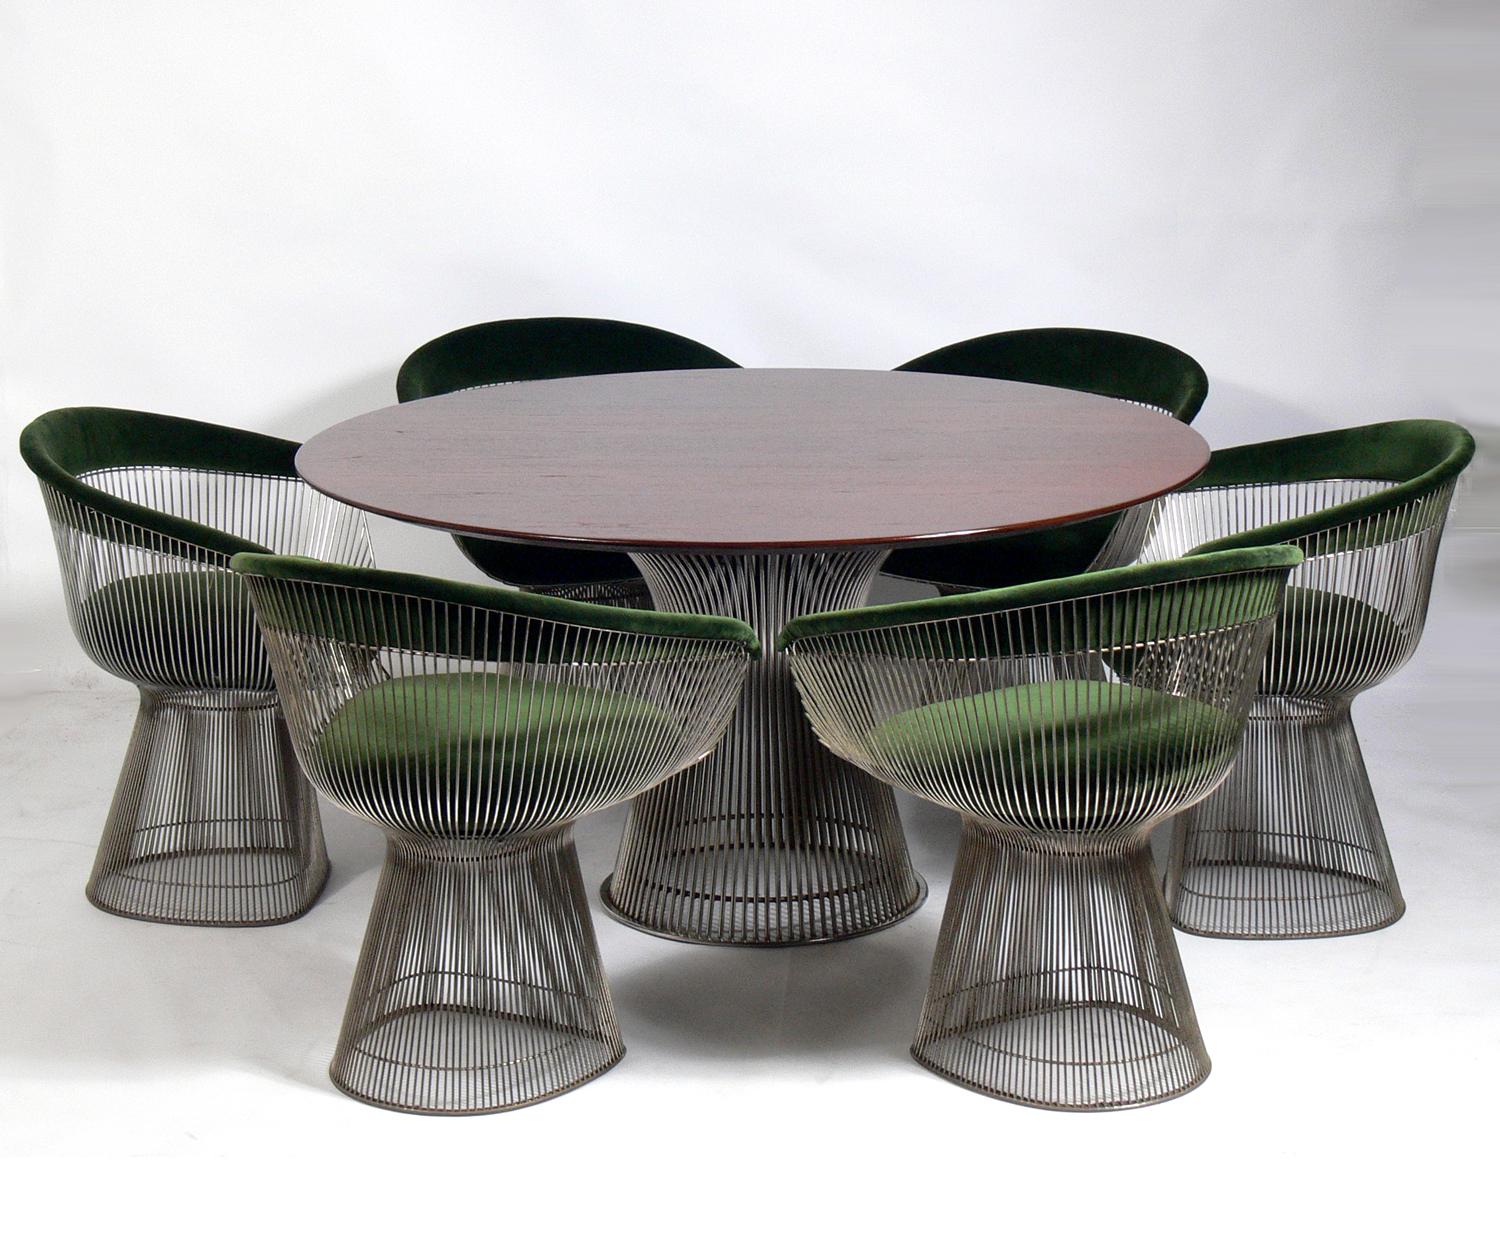 Plated Warren Platner Walnut and Chrome Dining Table